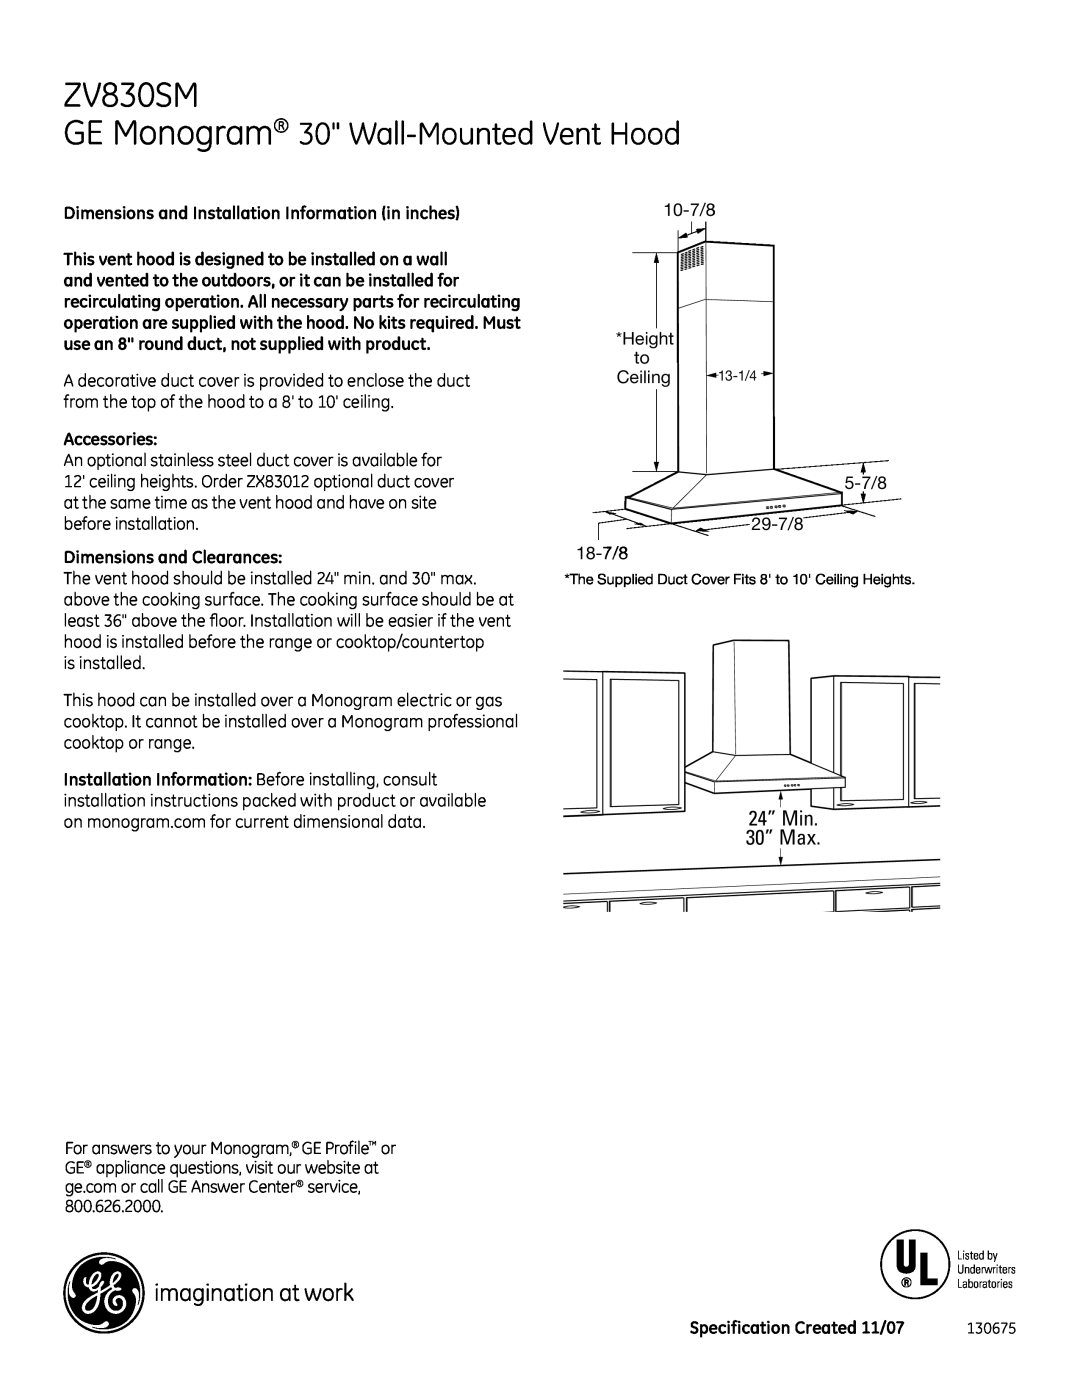 GE Monogram ZV830SM dimensions GE Monogram 30 Wall-Mounted Vent Hood, Dimensions and Installation Information in inches 